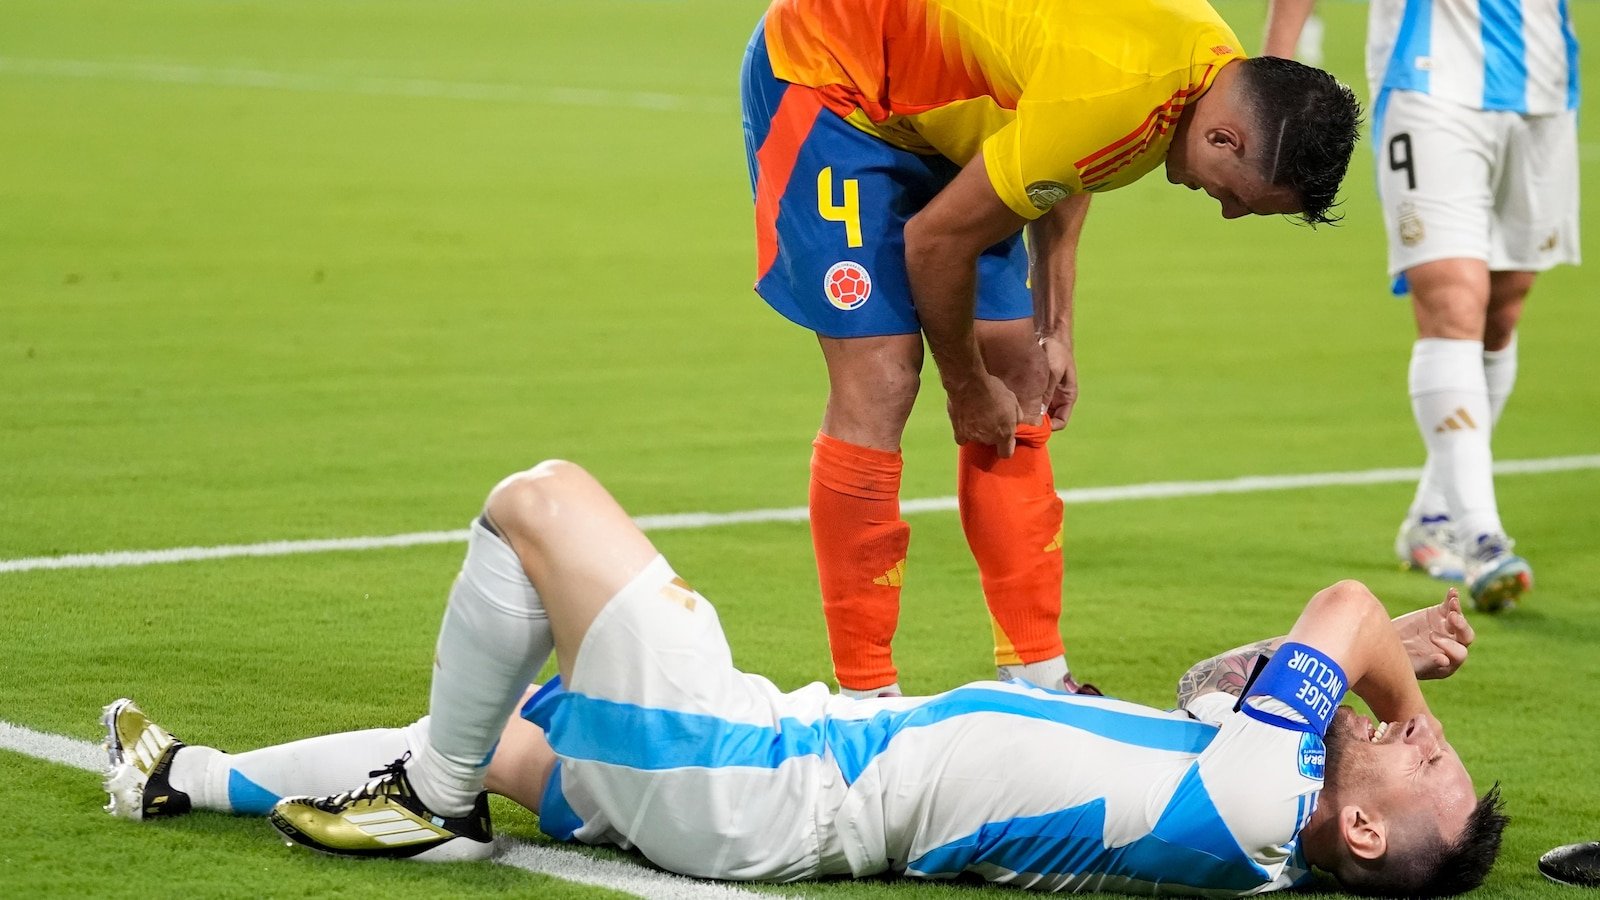 Lionel Messi exits Copa America final with apparent leg injury, ankle swollen